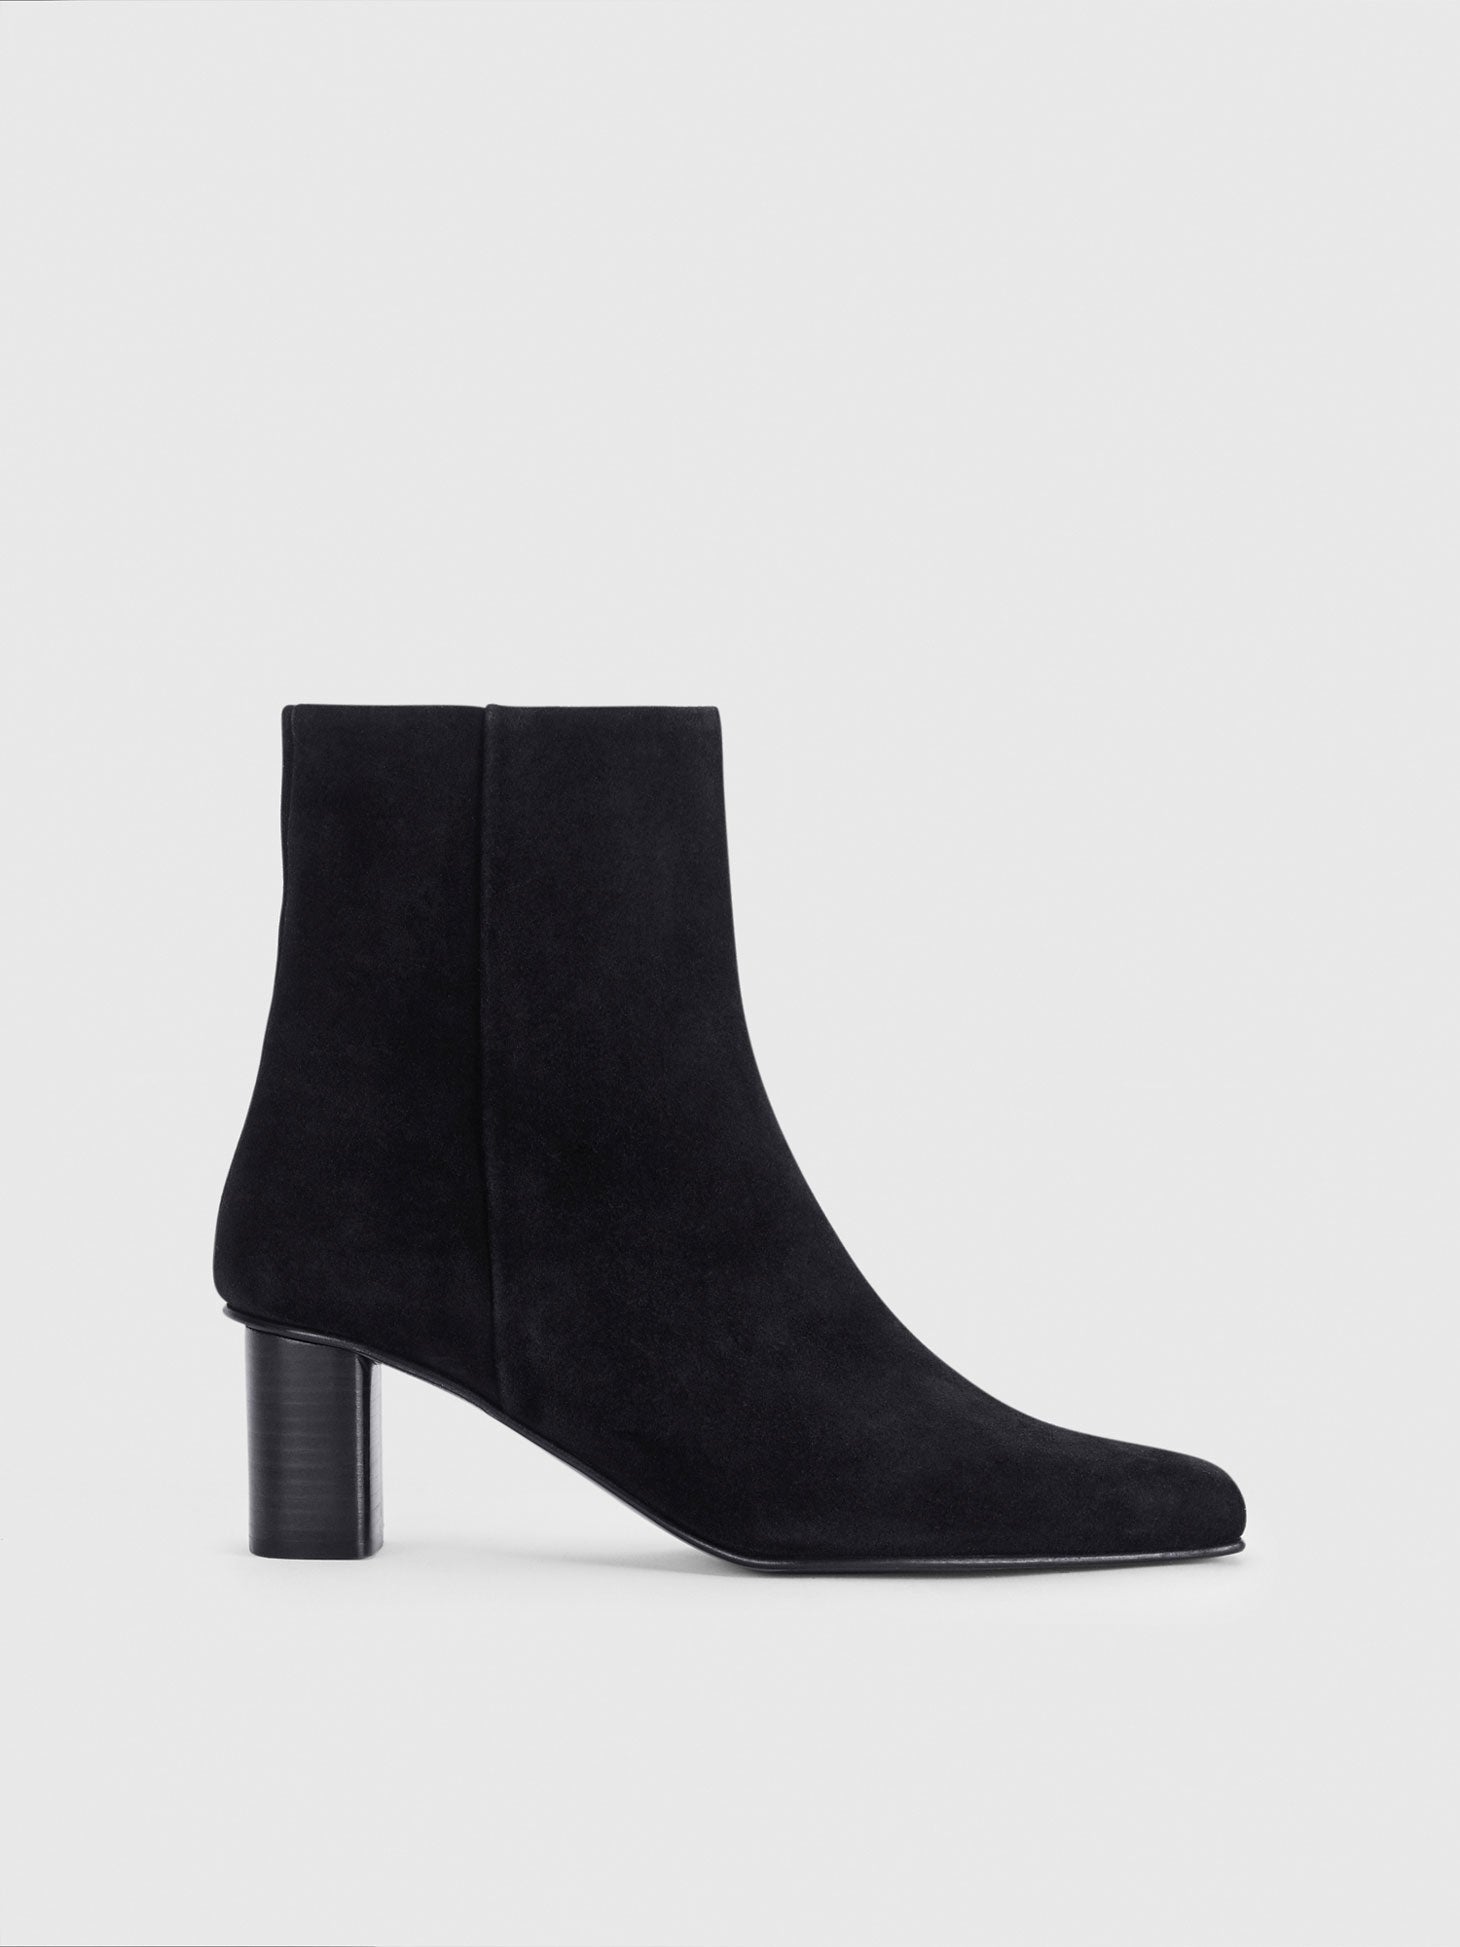 Praia Black Suede Ankle boots